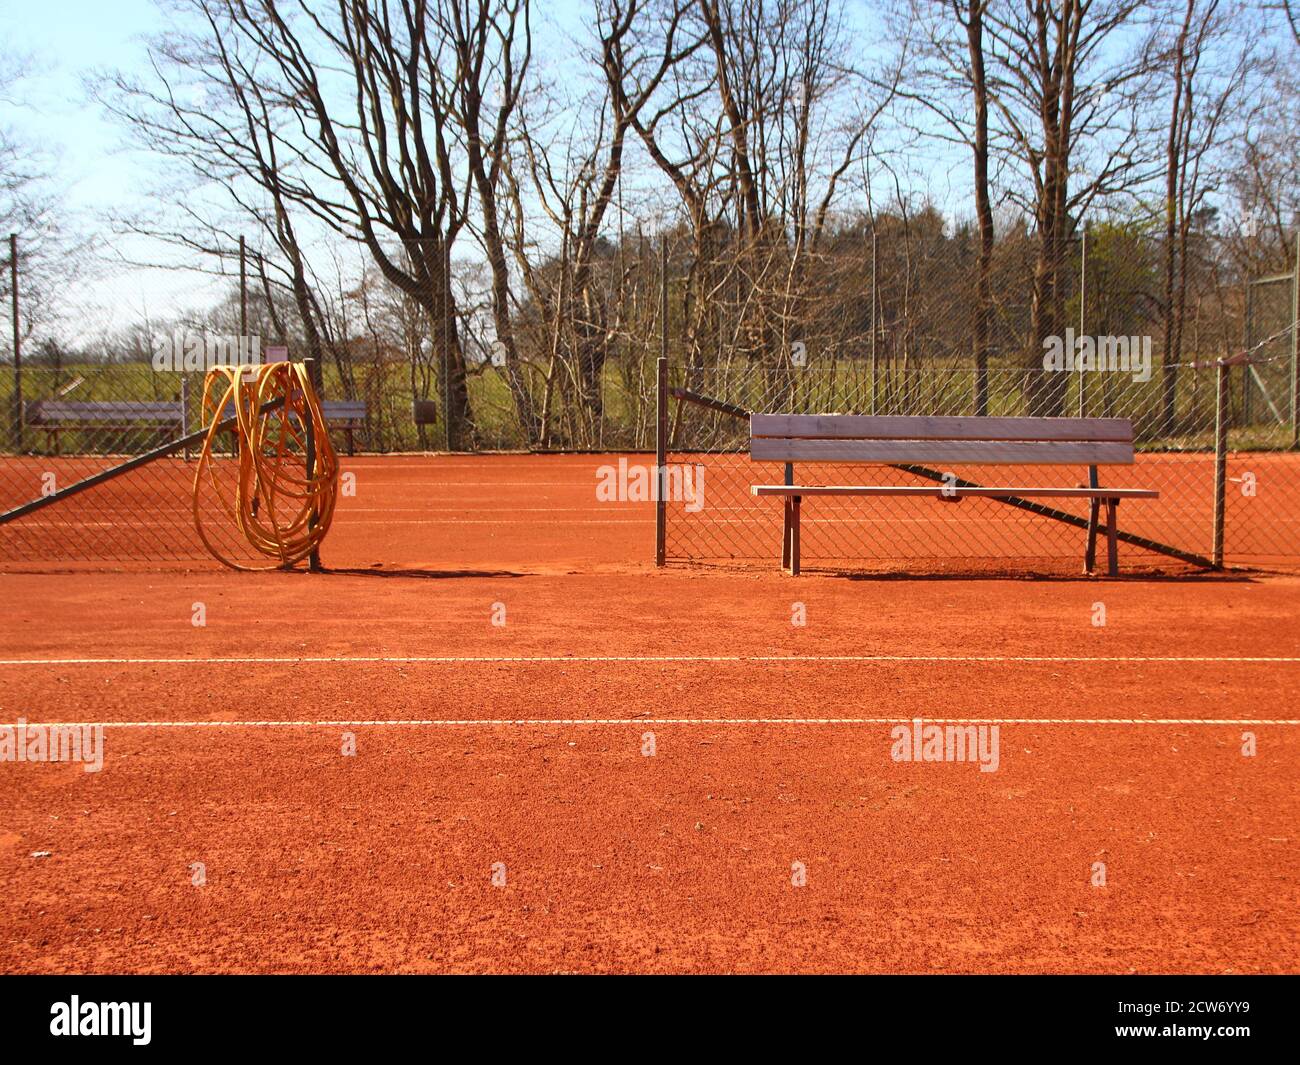 Detail of an empty red clay tennis court in the summer. There is a wooden bench and a yellow hose in the center. Stock Photo